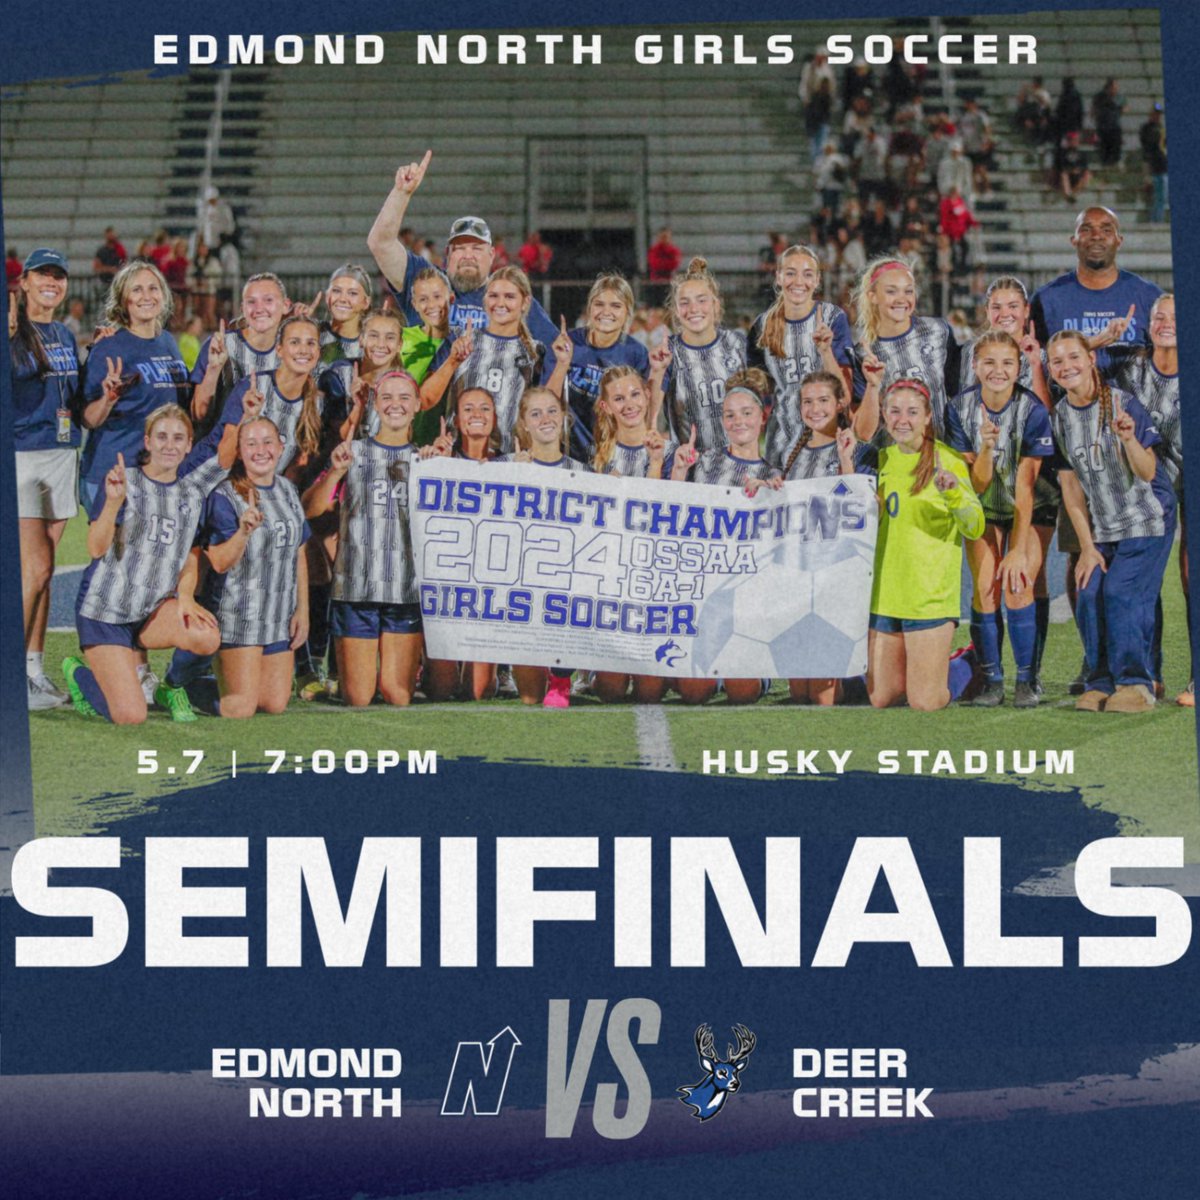 See you at Husky Stadium tonight to see Edmond North Girls Soccer take on Deer Creek in the State Semifinals! Winner earns a spot in the 6A State Championship Game! #HuskyNation #uN1ty @enhs.girls.soccer